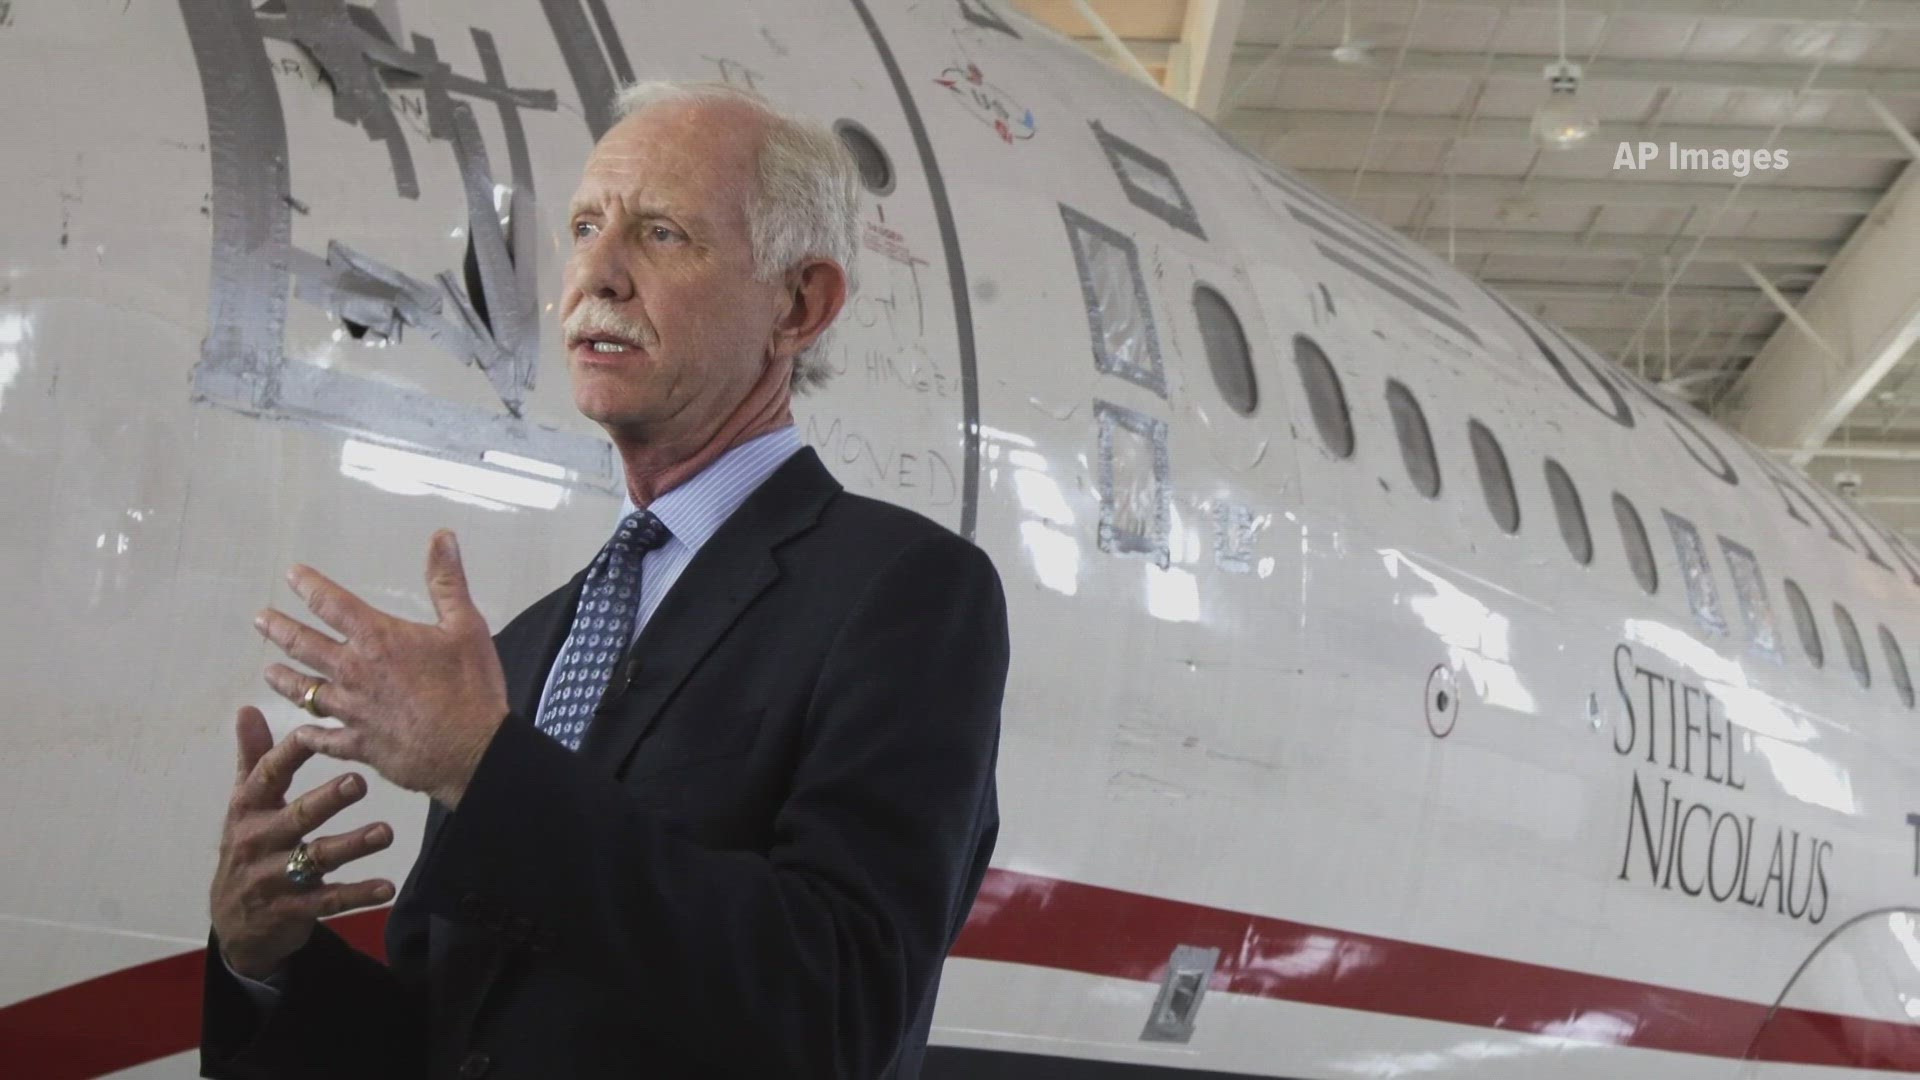 Sullenberger says Senator Sinema could gut training for pilots, a conflict of interest since she's been receiving cash donations from the airline industry.